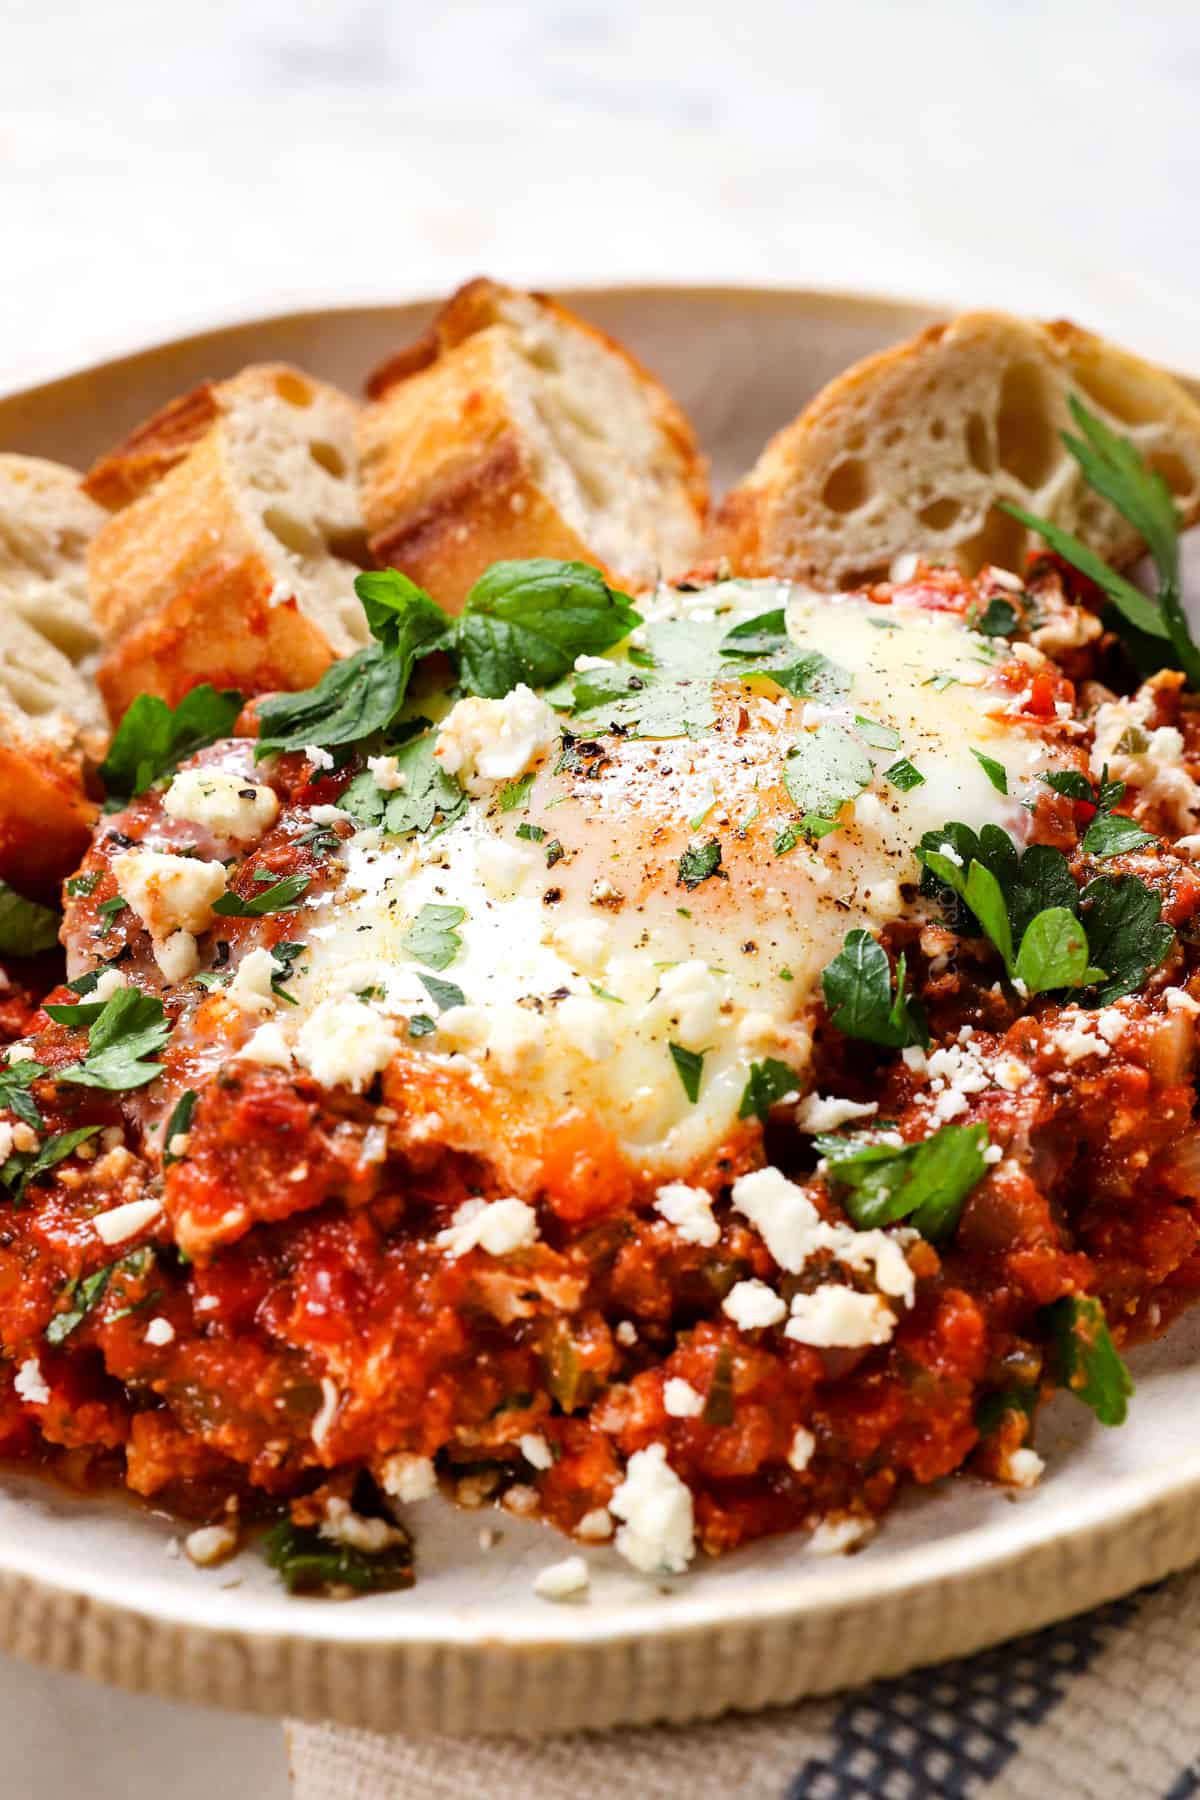 showing how to serve shakshuka on a plate with bread